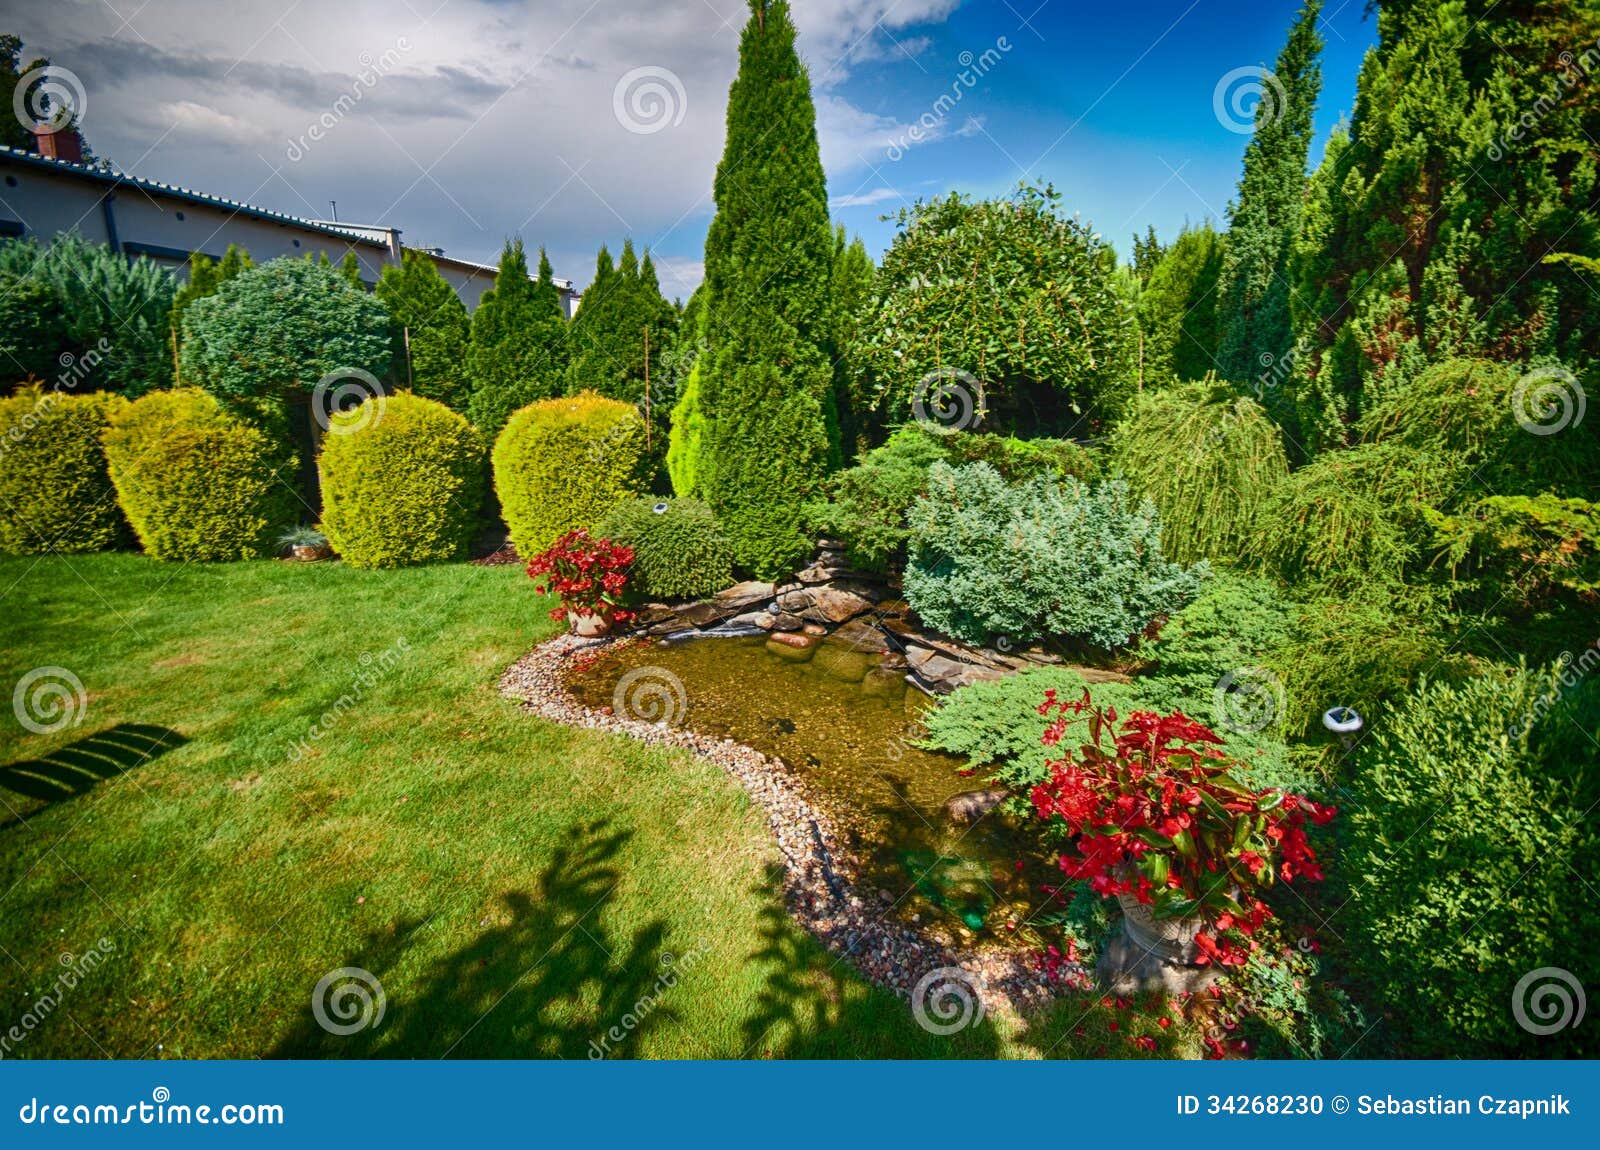 Scenic view of landscaped garden with lawn and pond in foreground.